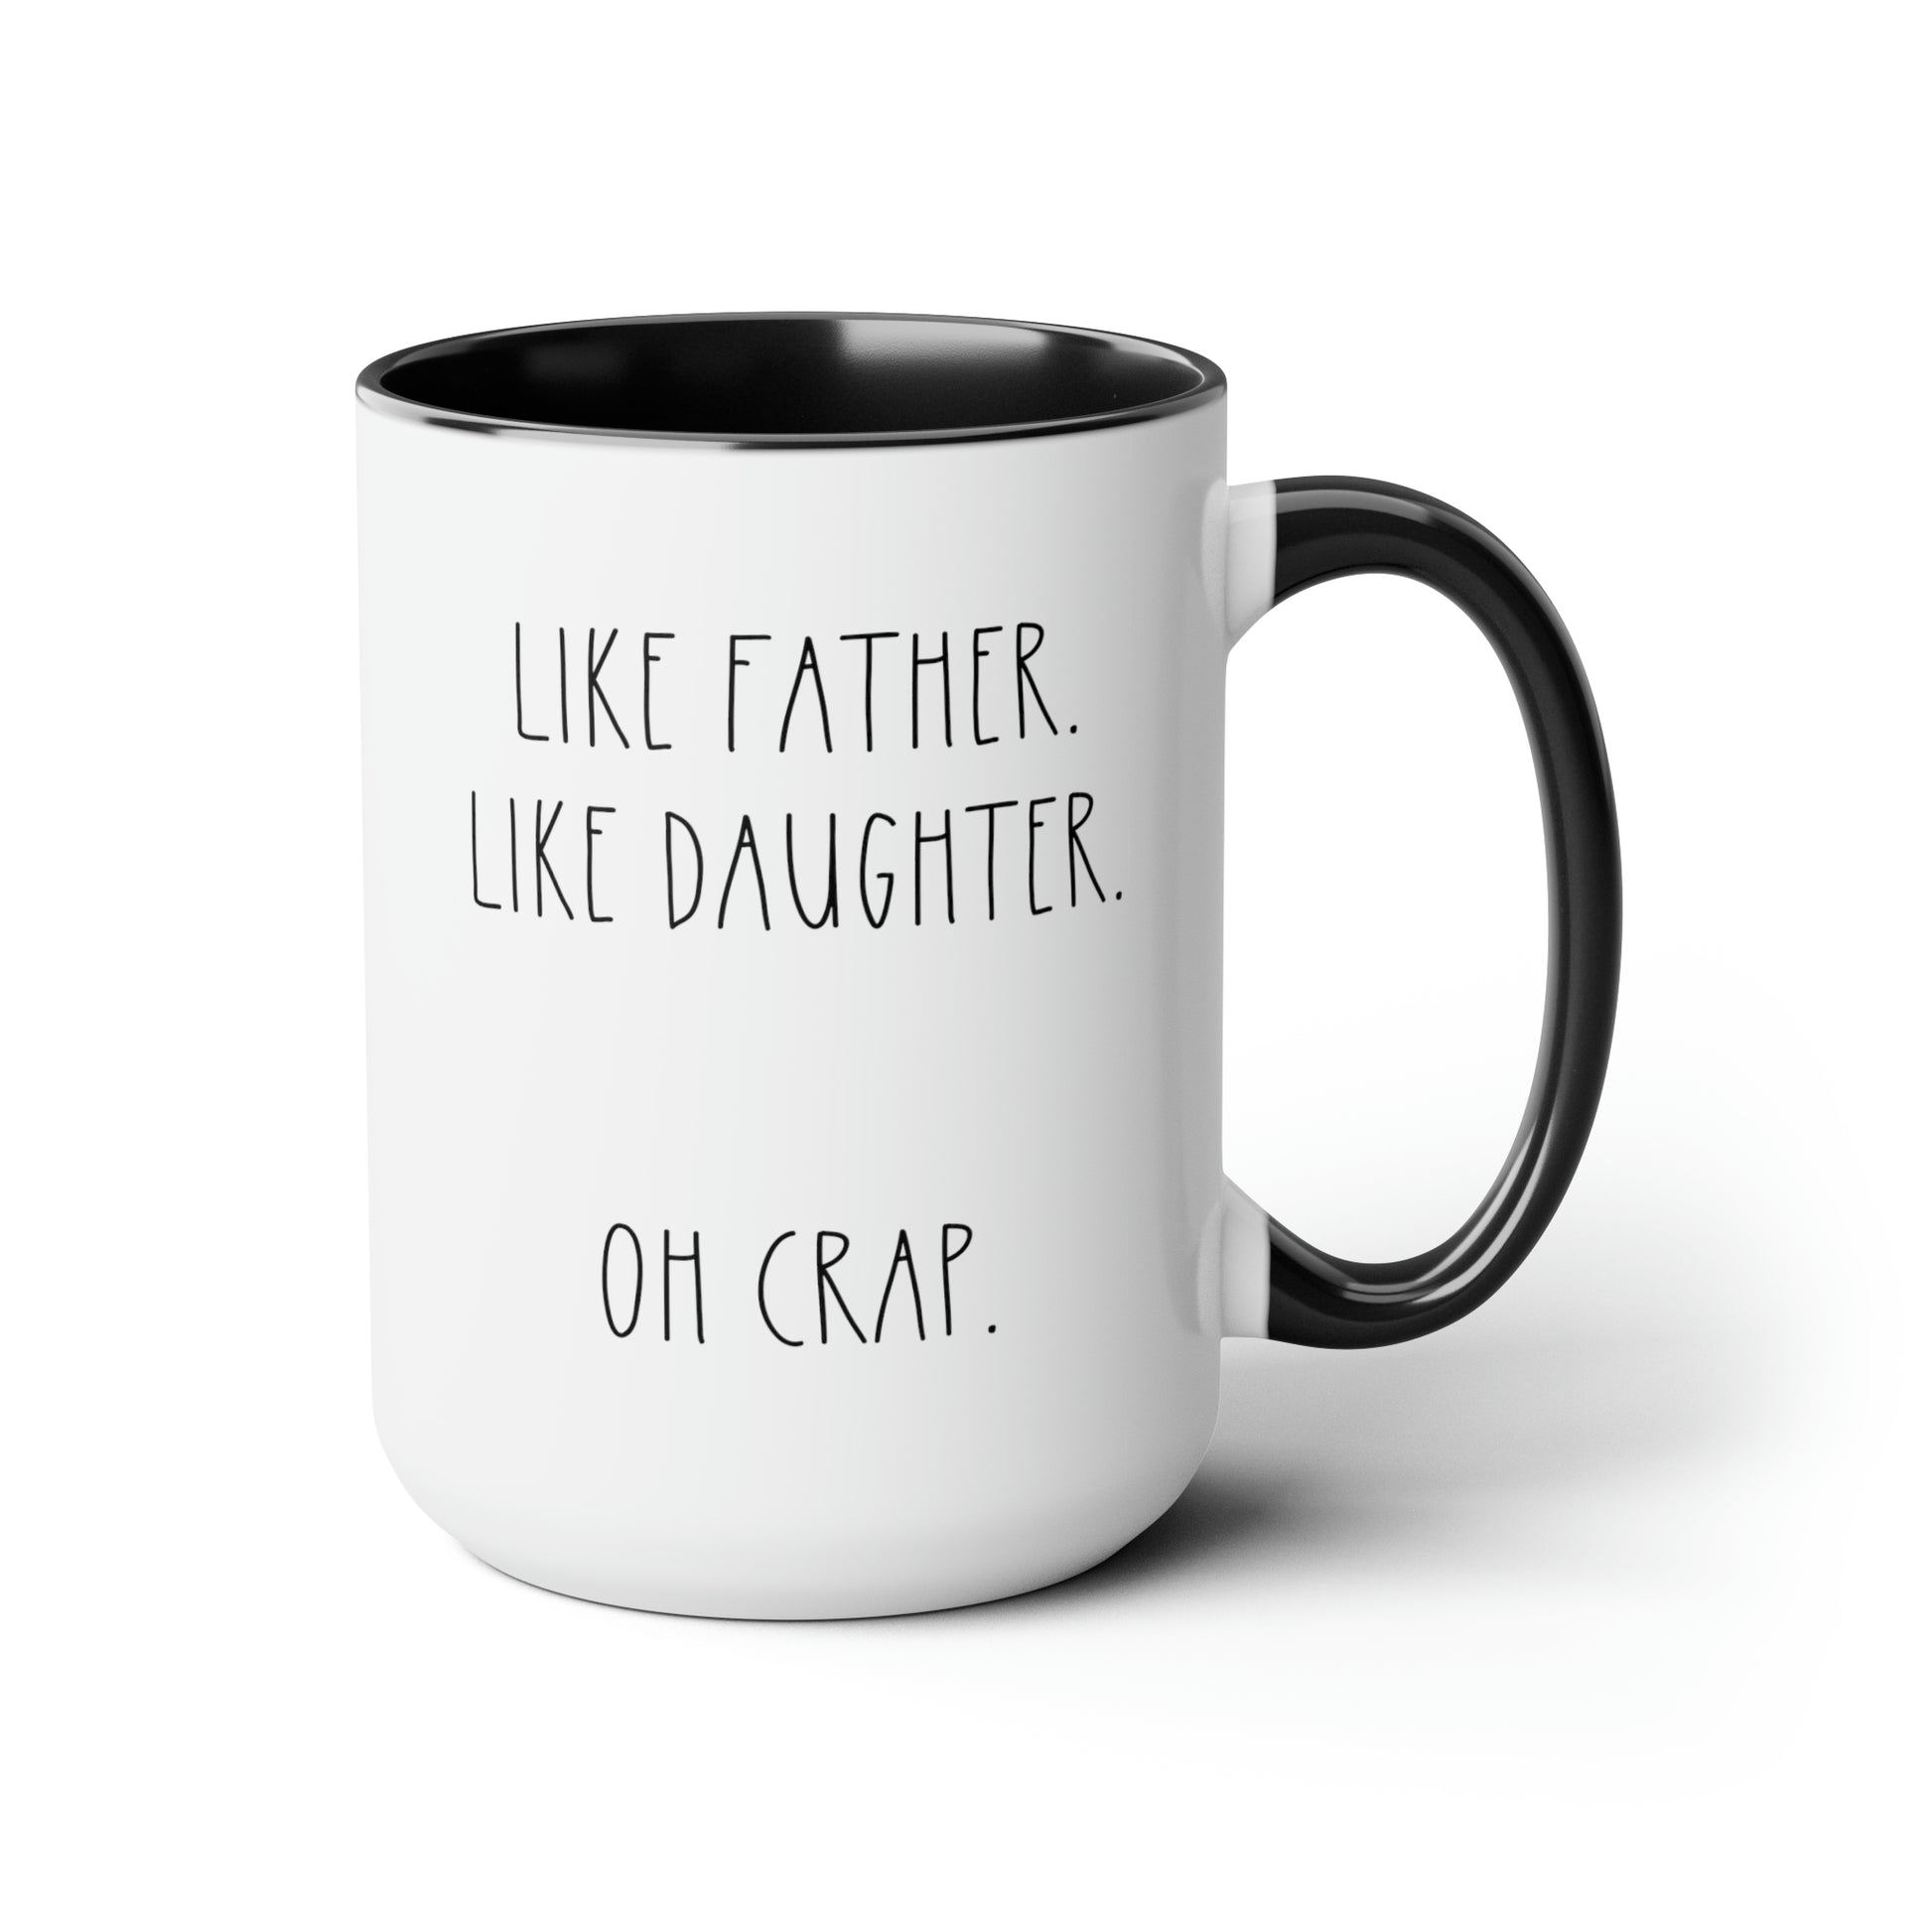 Like Father Like Daughter Oh Crap 15oz white with black accent funny large coffee mug gift for dad fathers day christmas birthday waveywares wavey wares wavywares wavy wares